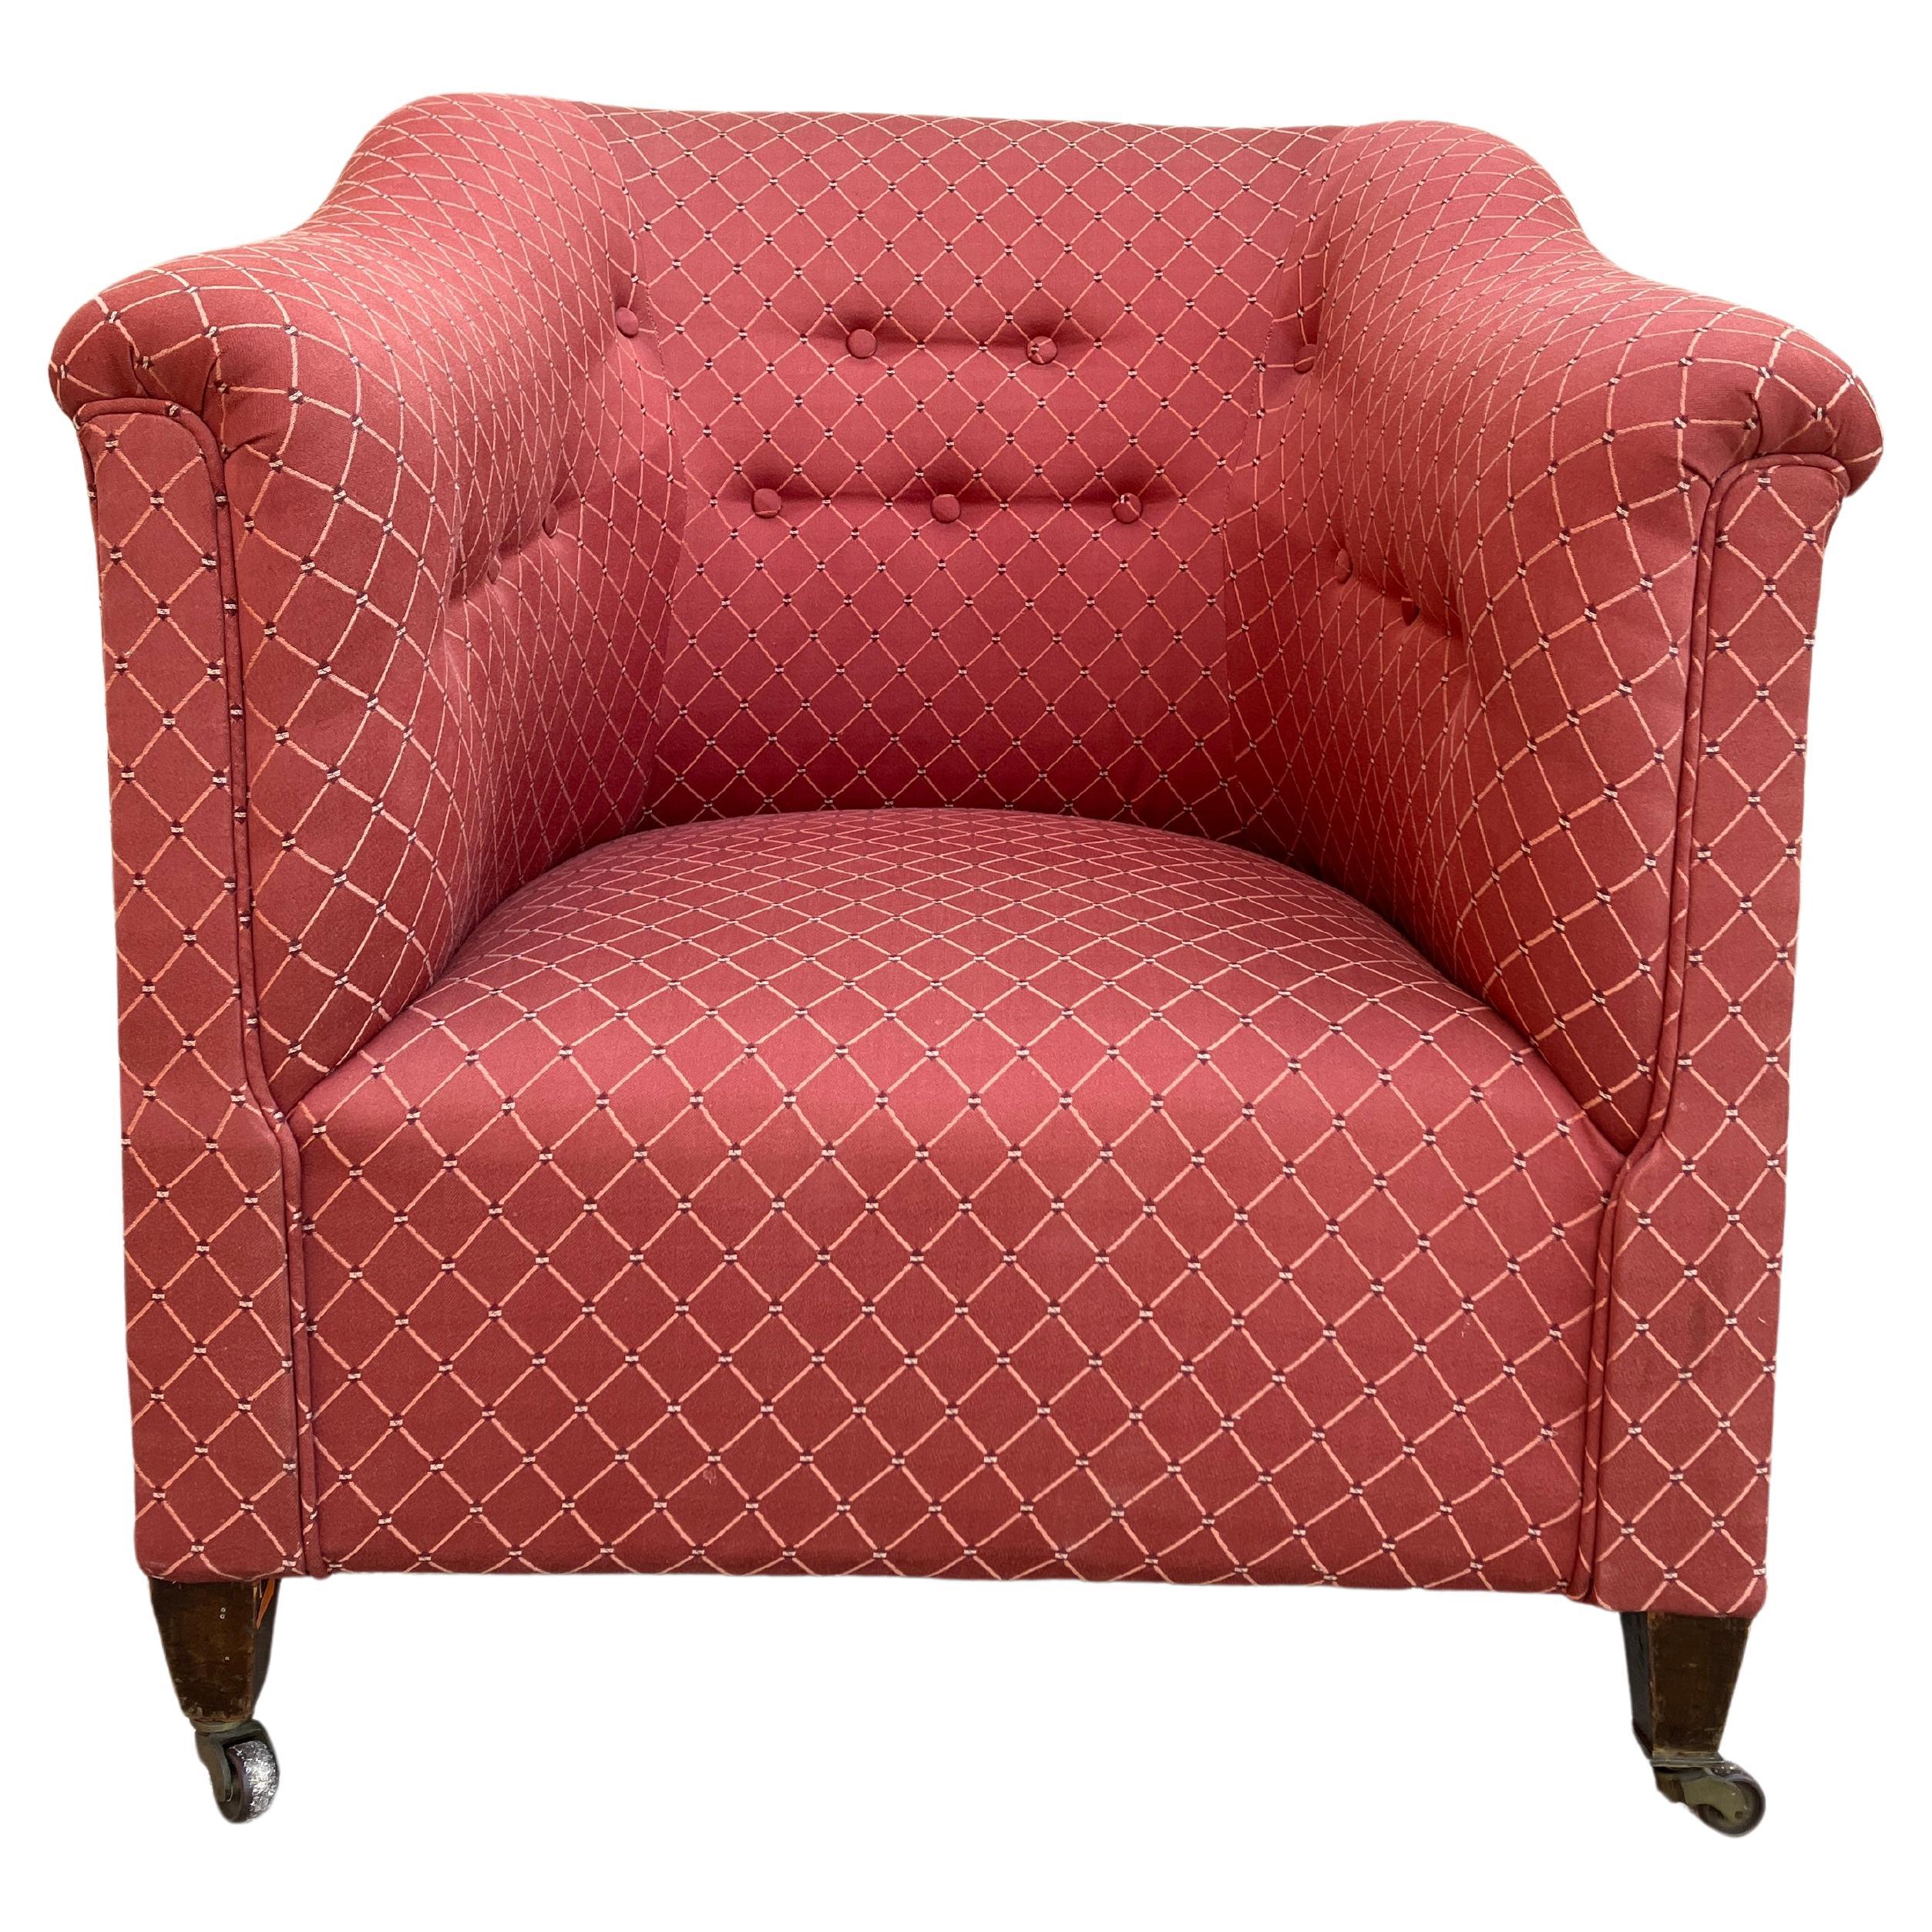 Late Victorian English antique tub armchair with new upholstery